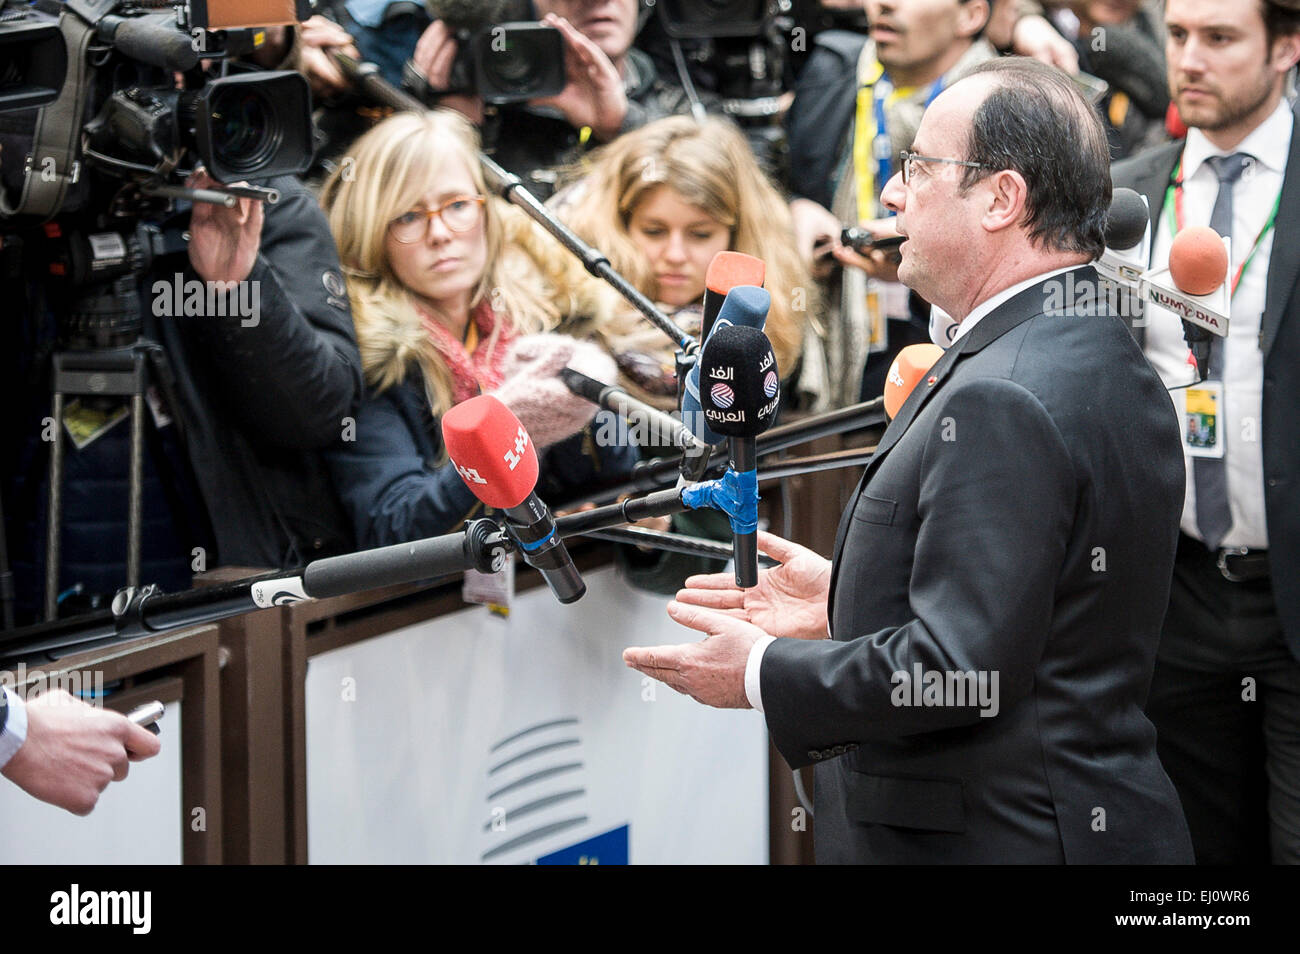 Brussels, Bxl, Belgium. 19th Mar, 2015. French President Francois Holland arrives ahead of the EU Summit at European Council headquarters in Brussels, Belgium on 19.03.2015 by Wiktor Dabkowski Credit:  Wiktor Dabkowski/ZUMA Wire/Alamy Live News Stock Photo